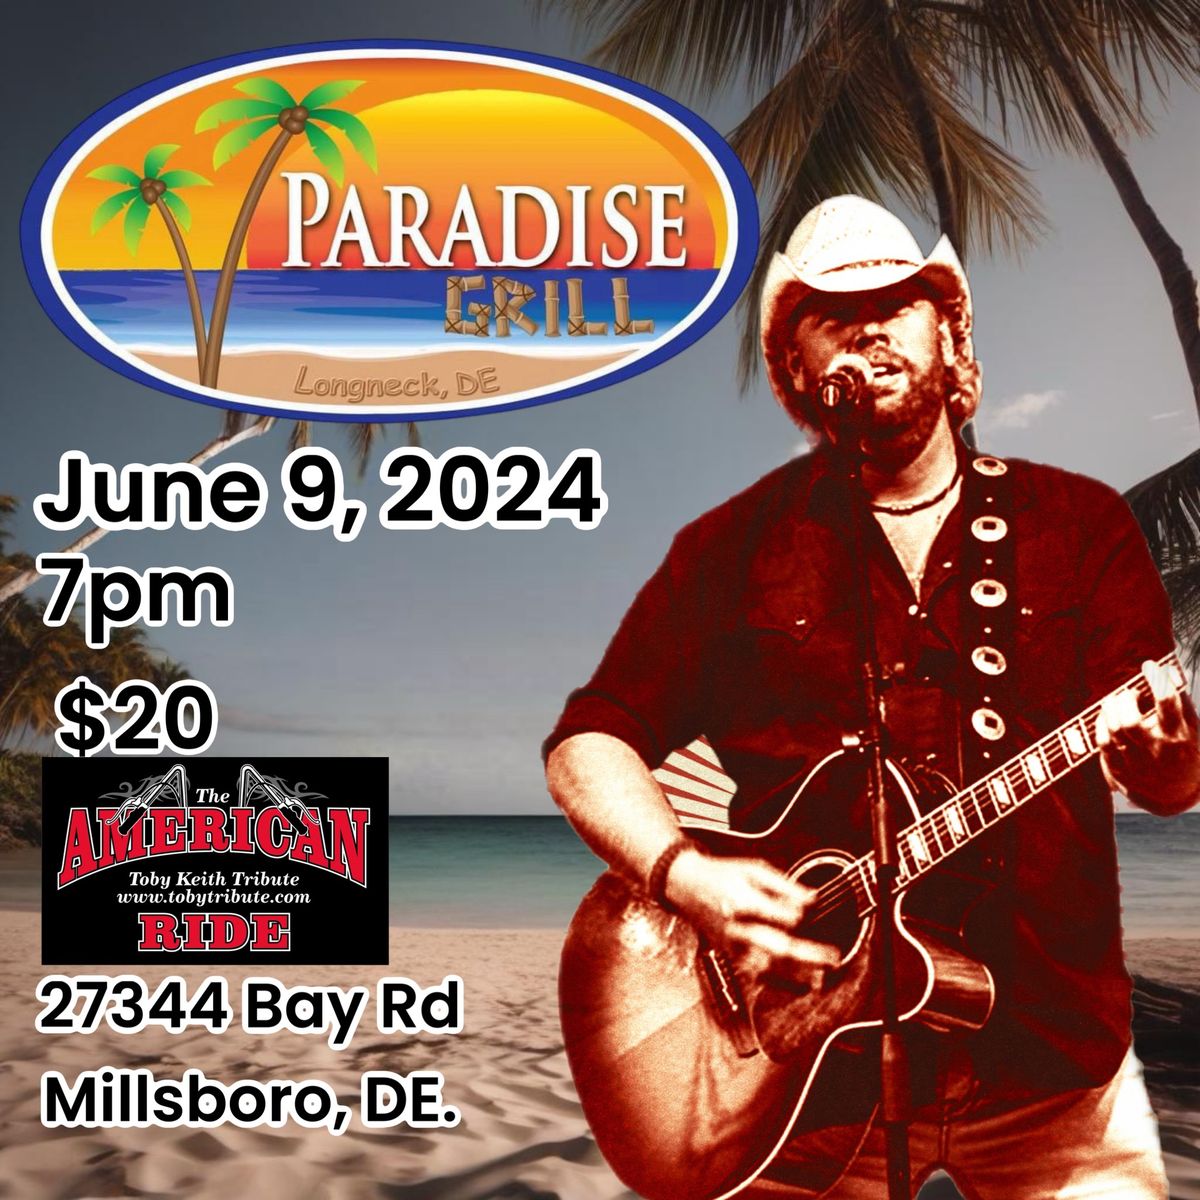 The American Ride- Toby Keith tribute at the Paradise Grill